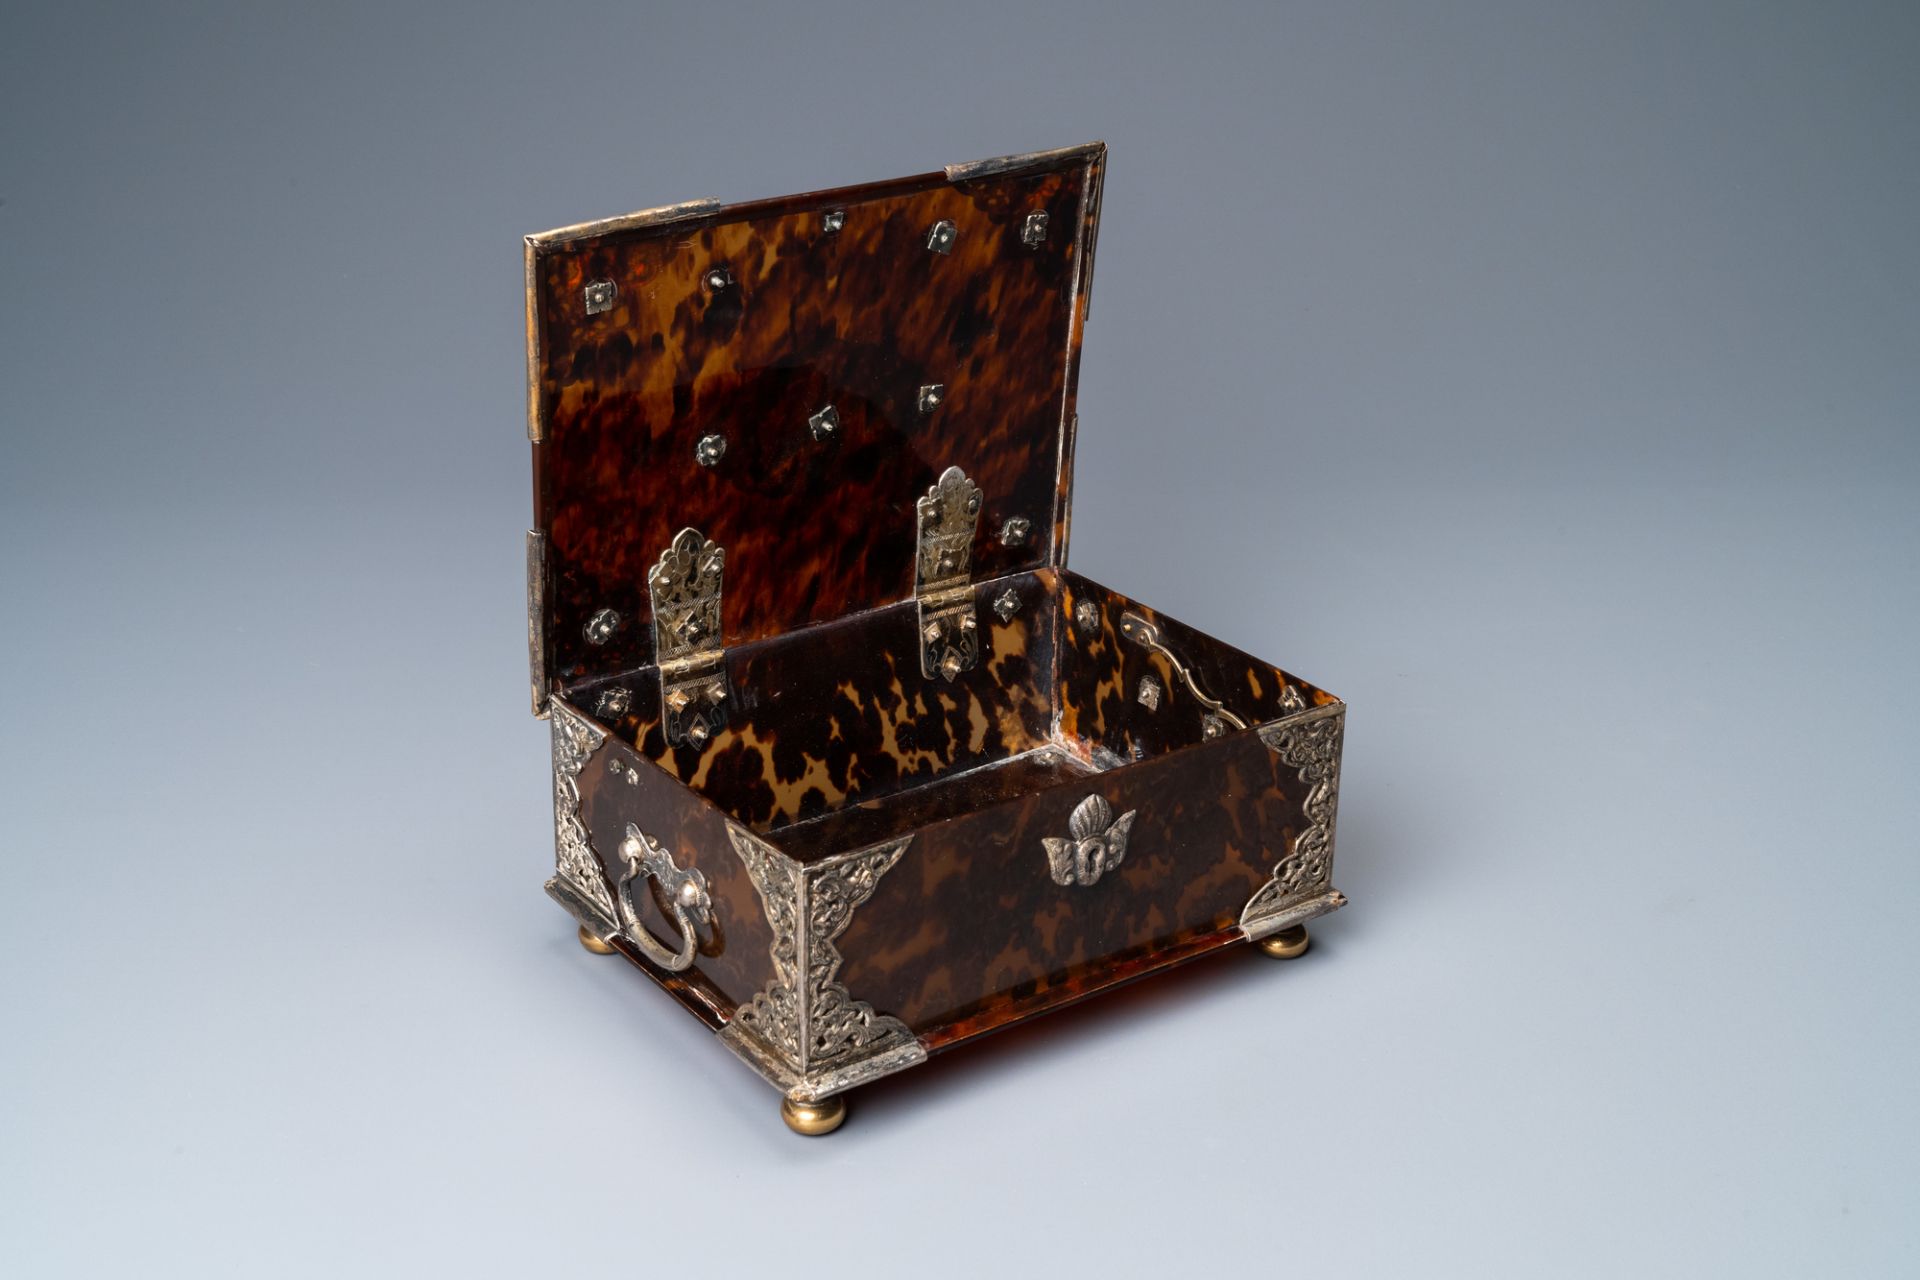 A Dutch colonial silver-mounted tortoise shell sirih casket, ca. 1700 - Image 2 of 10